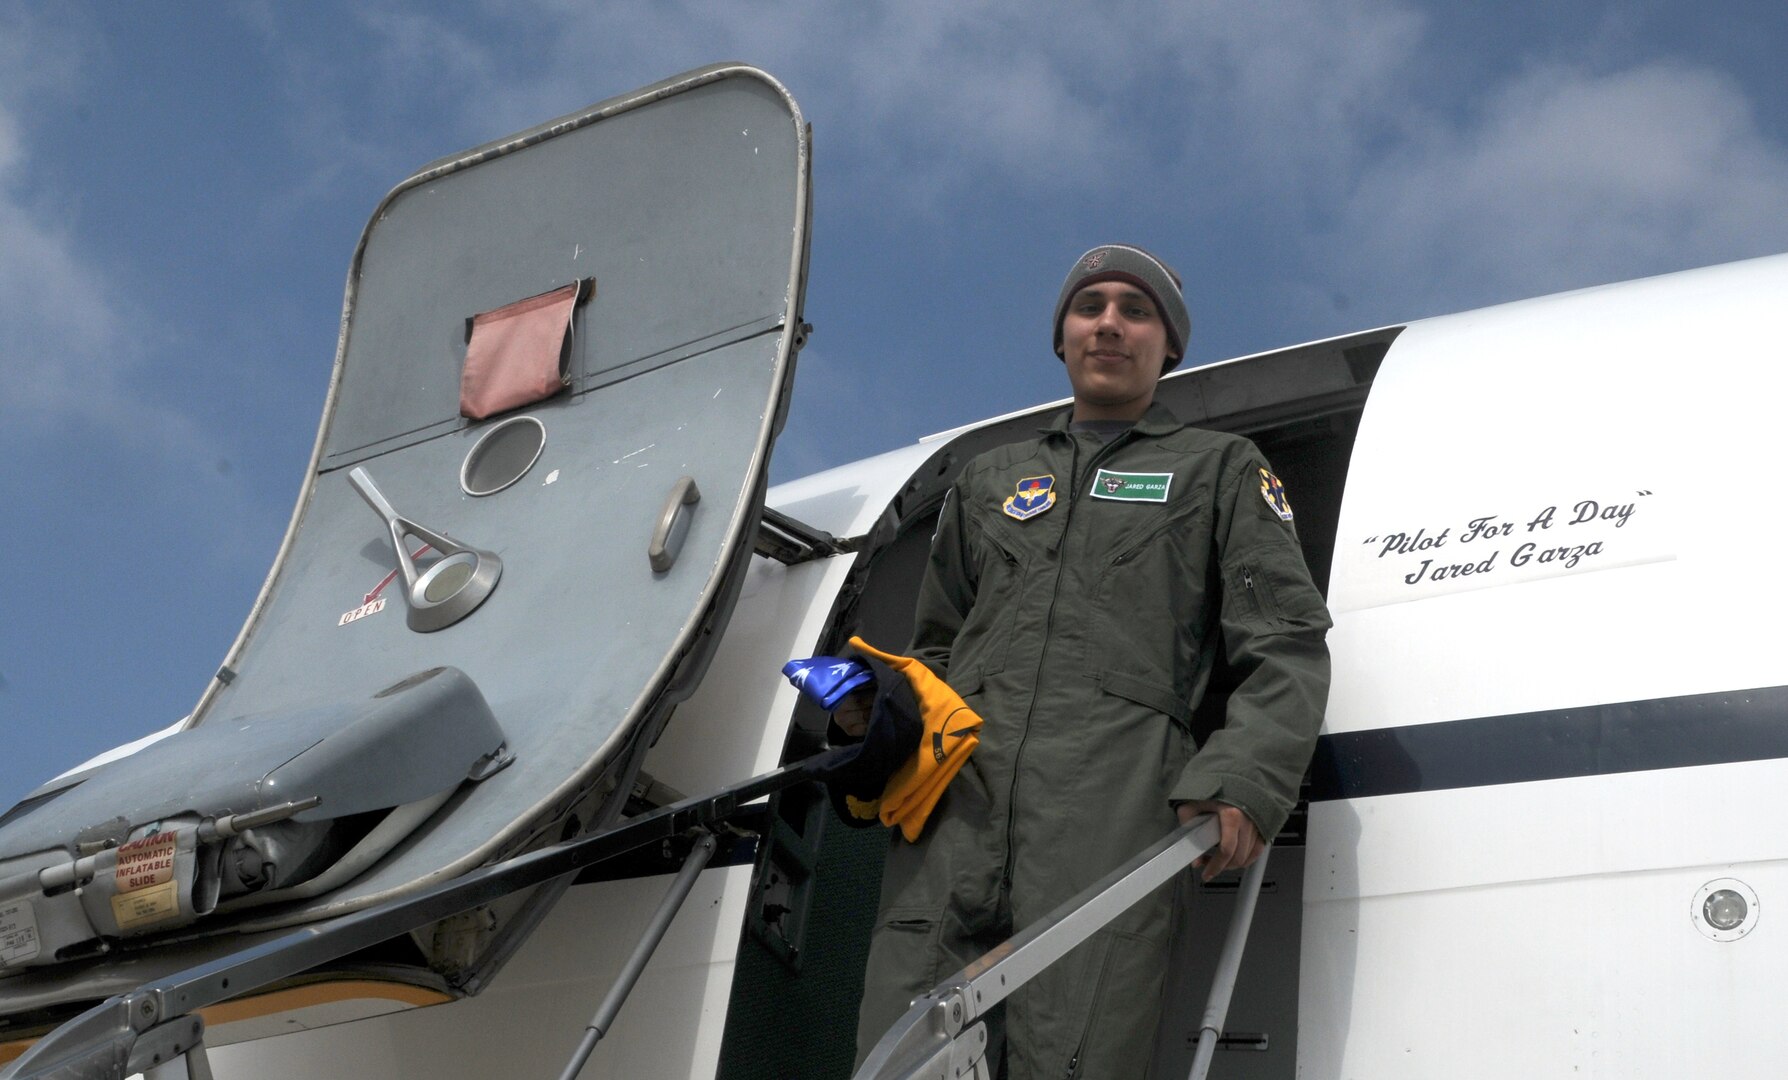 Jared Garza steps out of a T-1 during his adventure as Pilot for a Day on Feb. 27. (U.S. Air Force photo by Steve White)